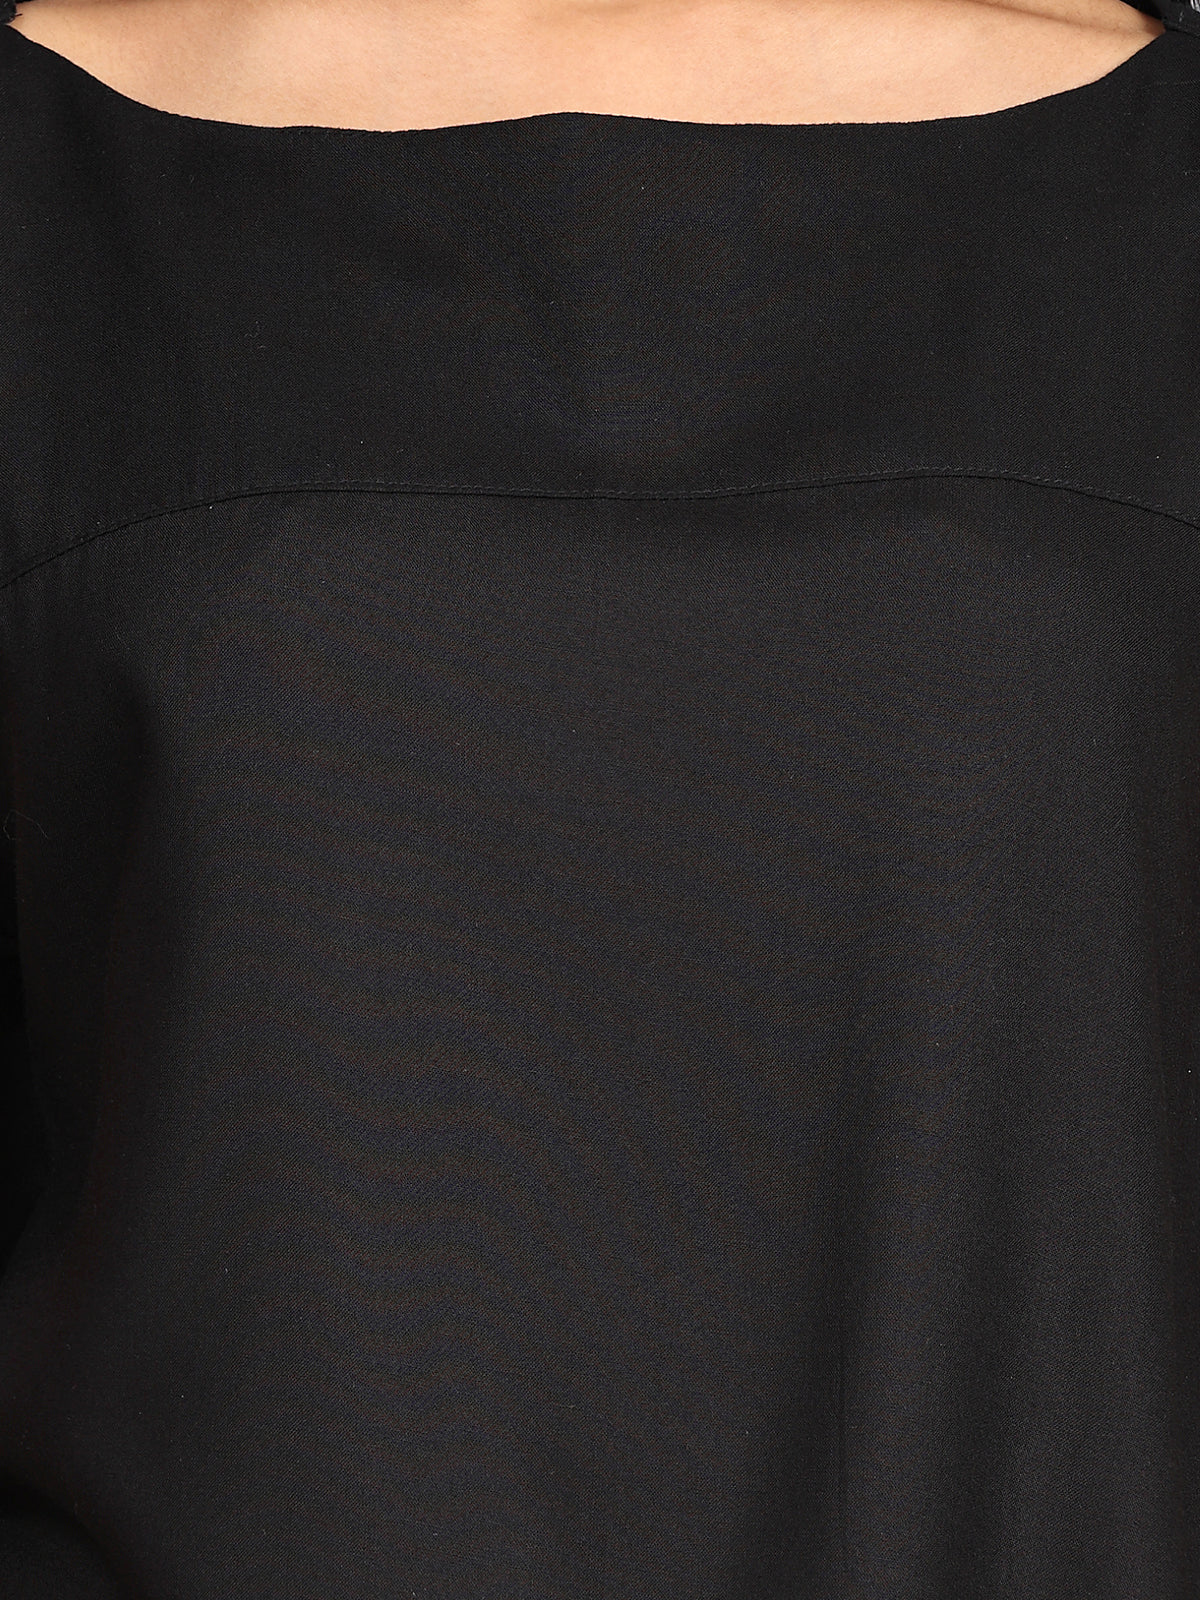 Boat Neck Black Woven Top